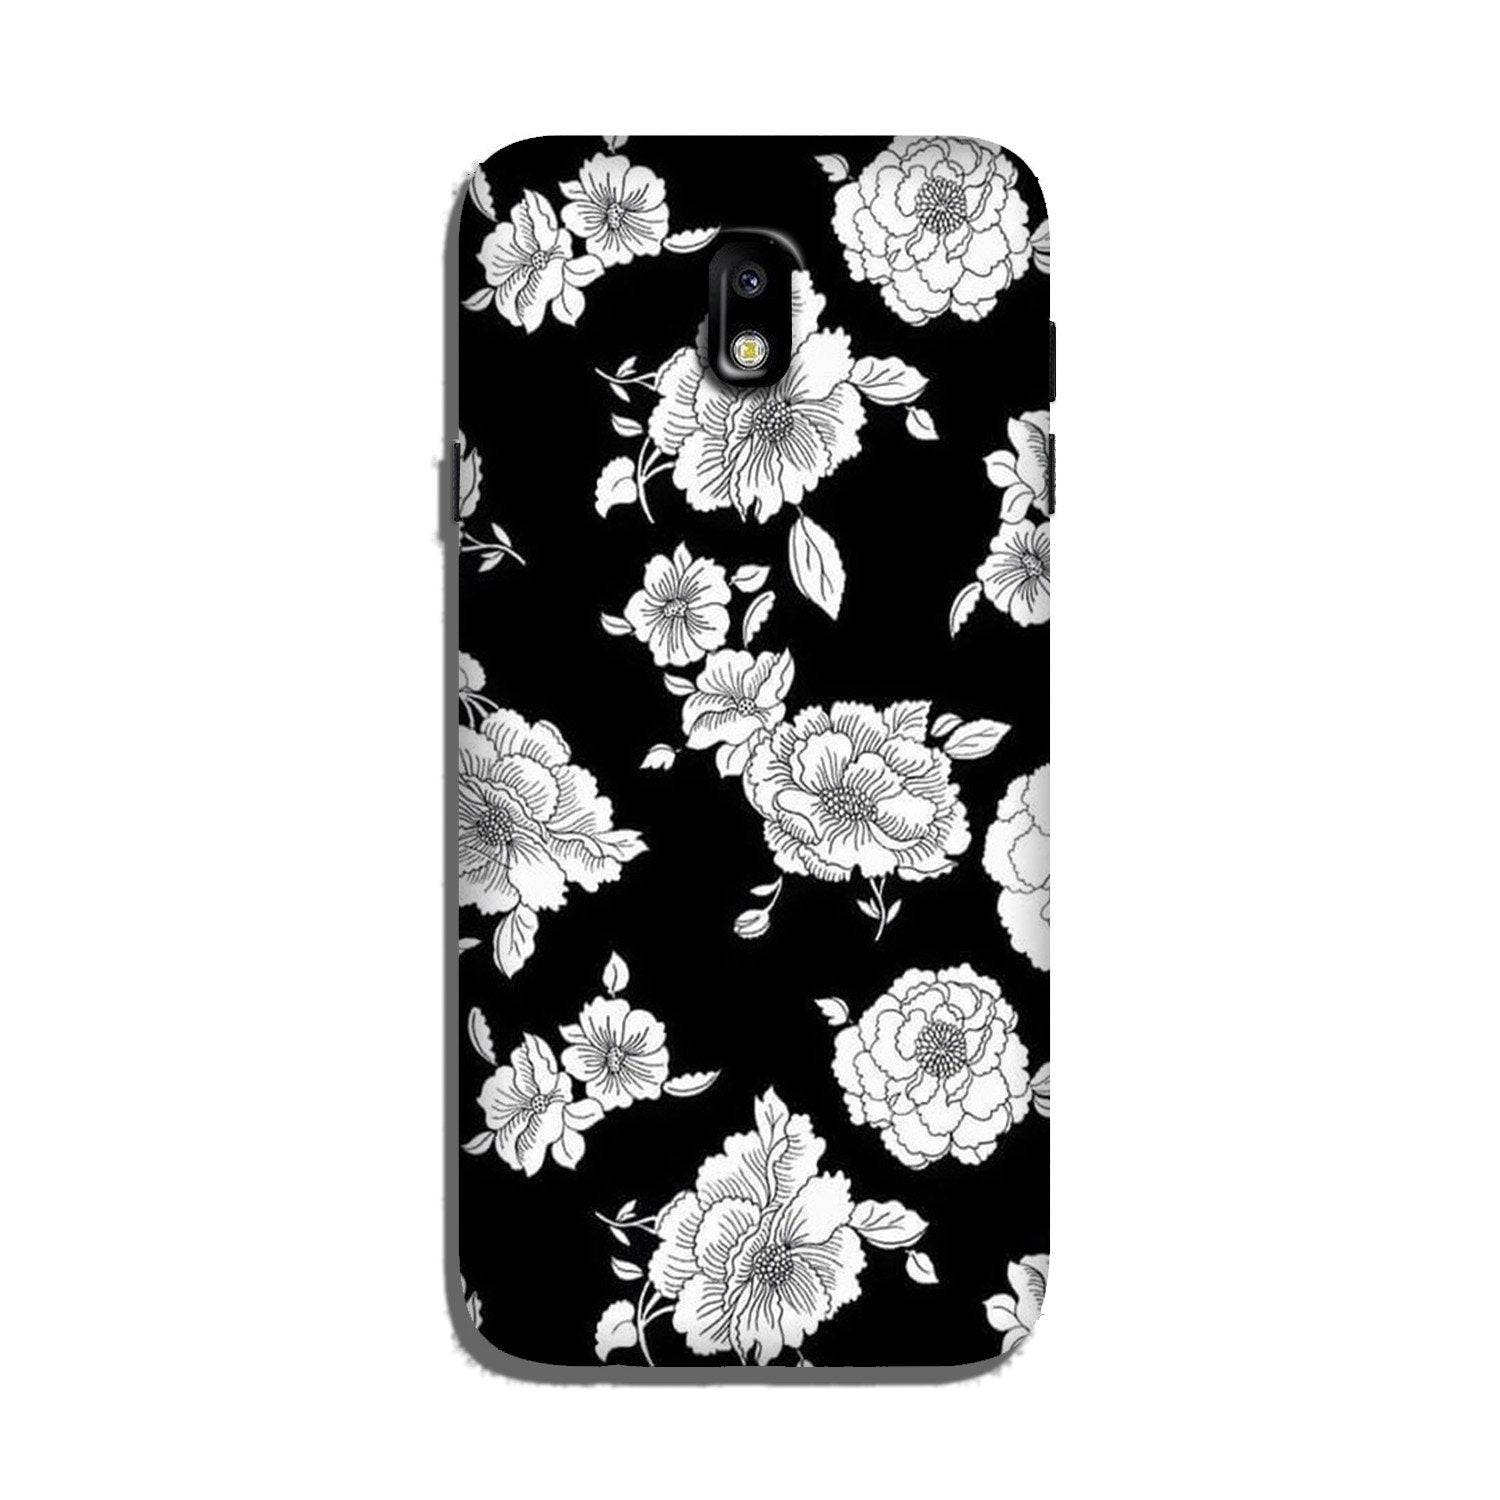 White flowers Black Background Case for Galaxy J5 Pro